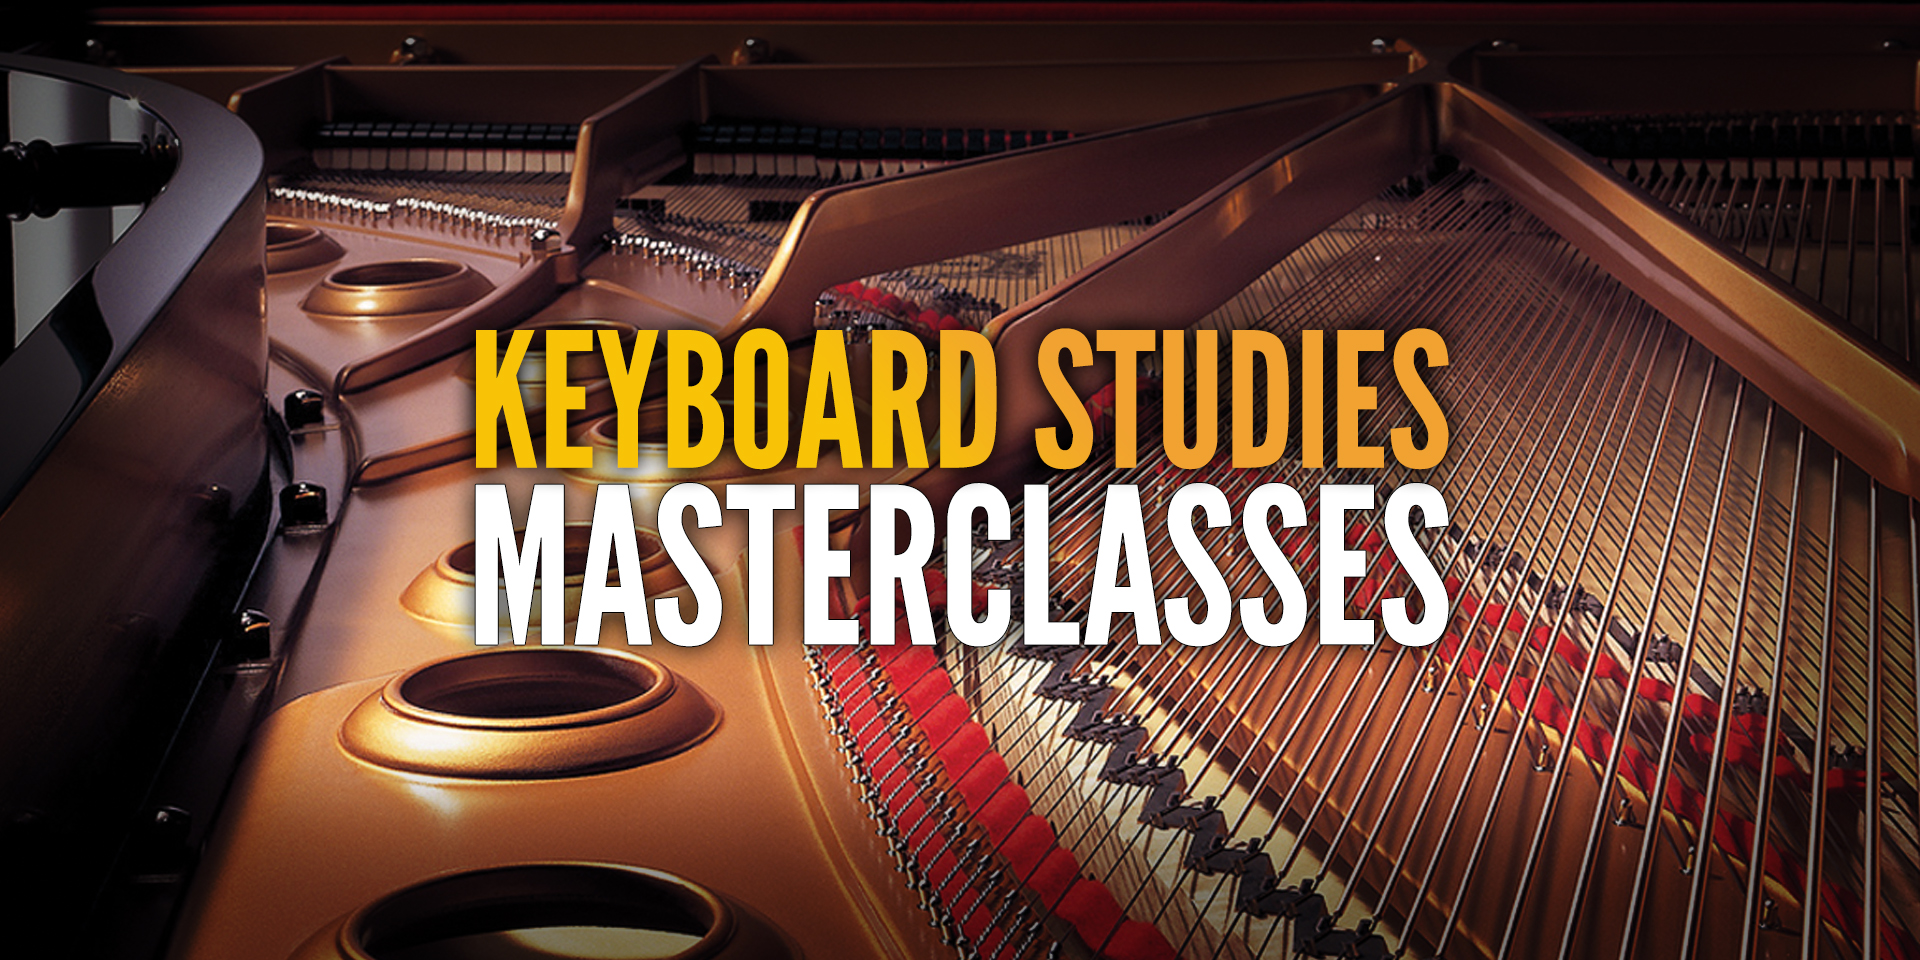 Keyboard Studies Masterclasses superimposed over the inside of a grand piano.